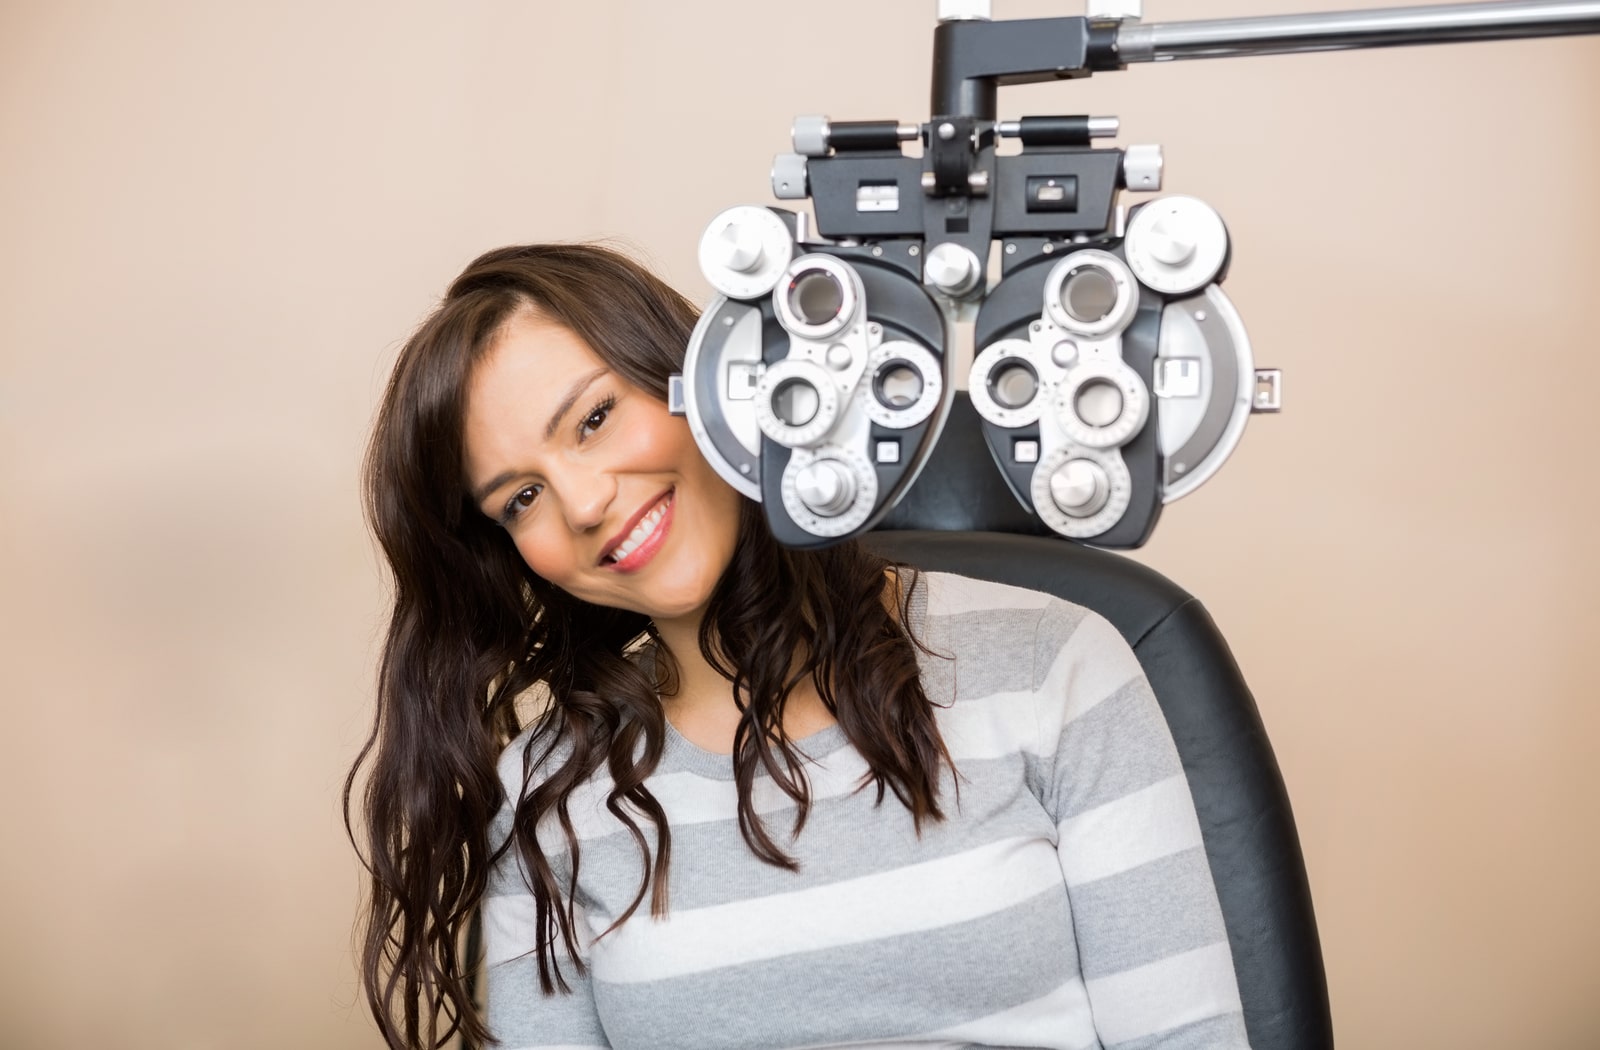 A woman sitting behind a phoropter at an optometrist office, smiling